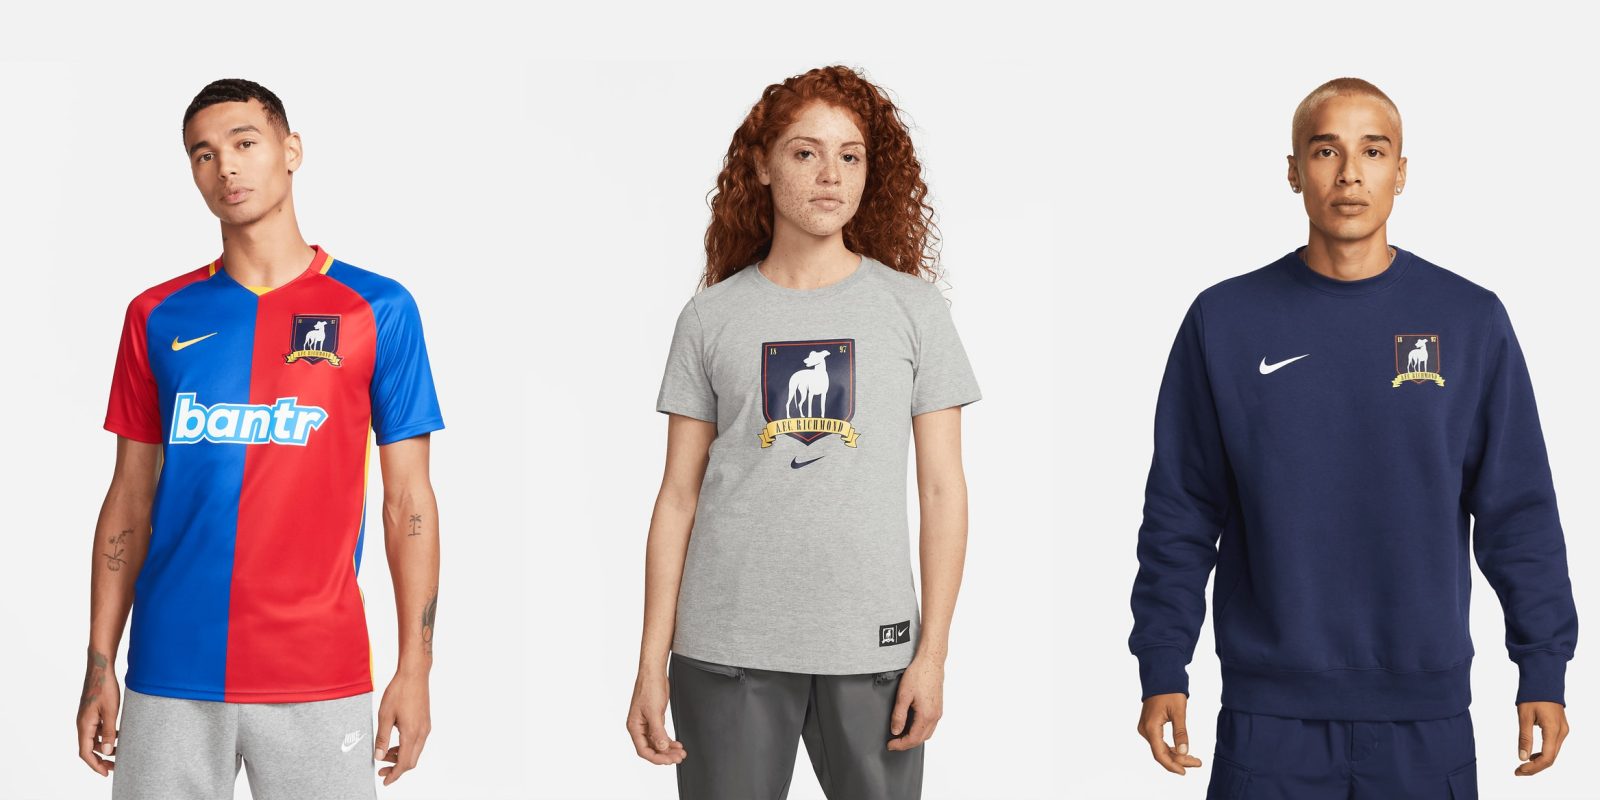 Report: Apple to start selling Ted Lasso merch through the Apple online store [update: stop believing]